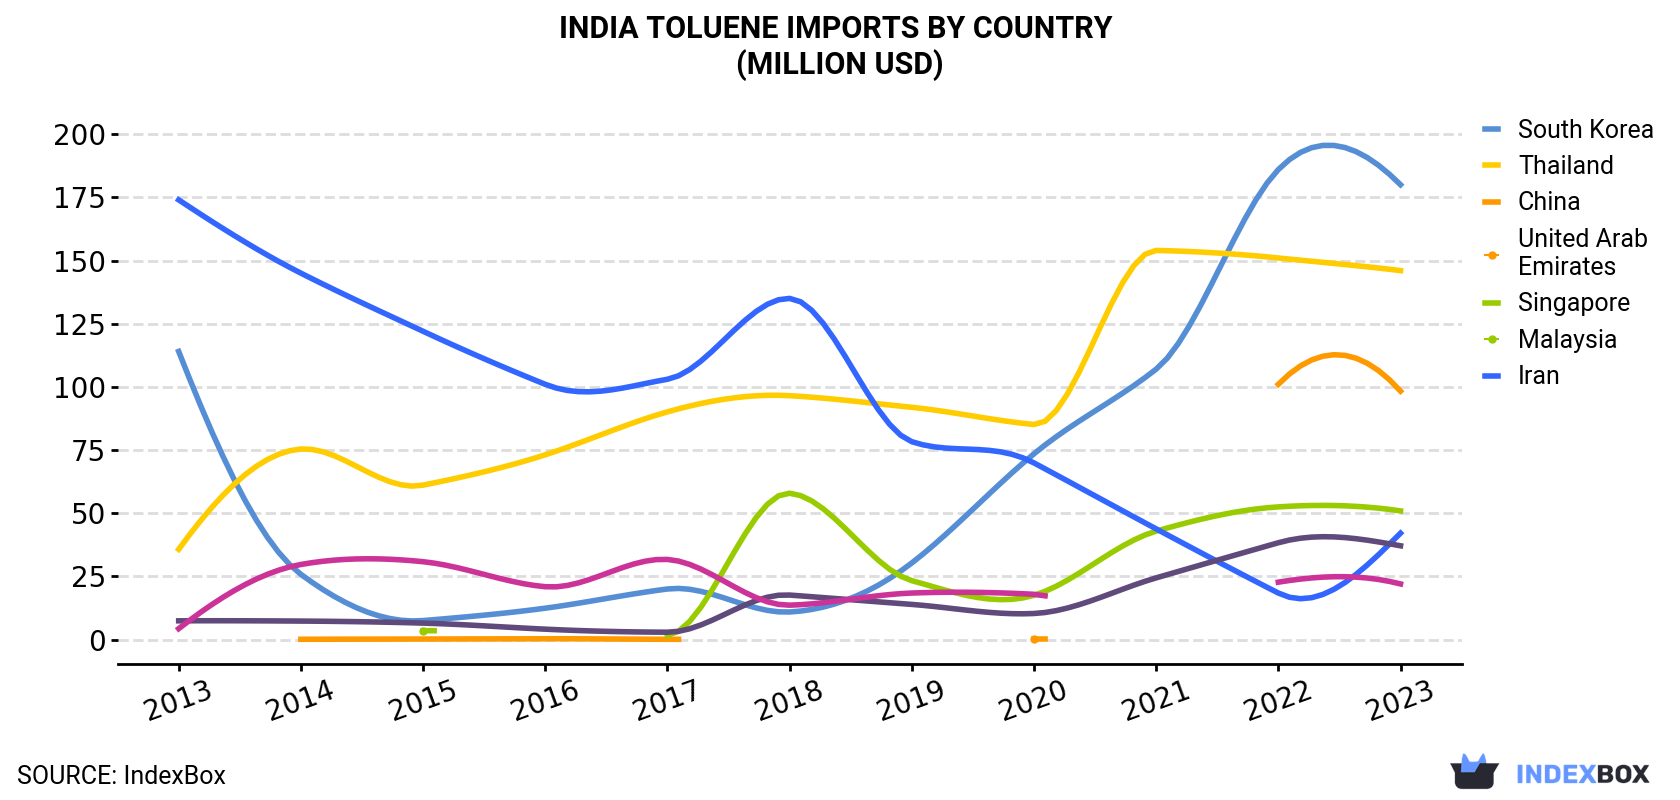 India Toluene Imports By Country (Million USD)